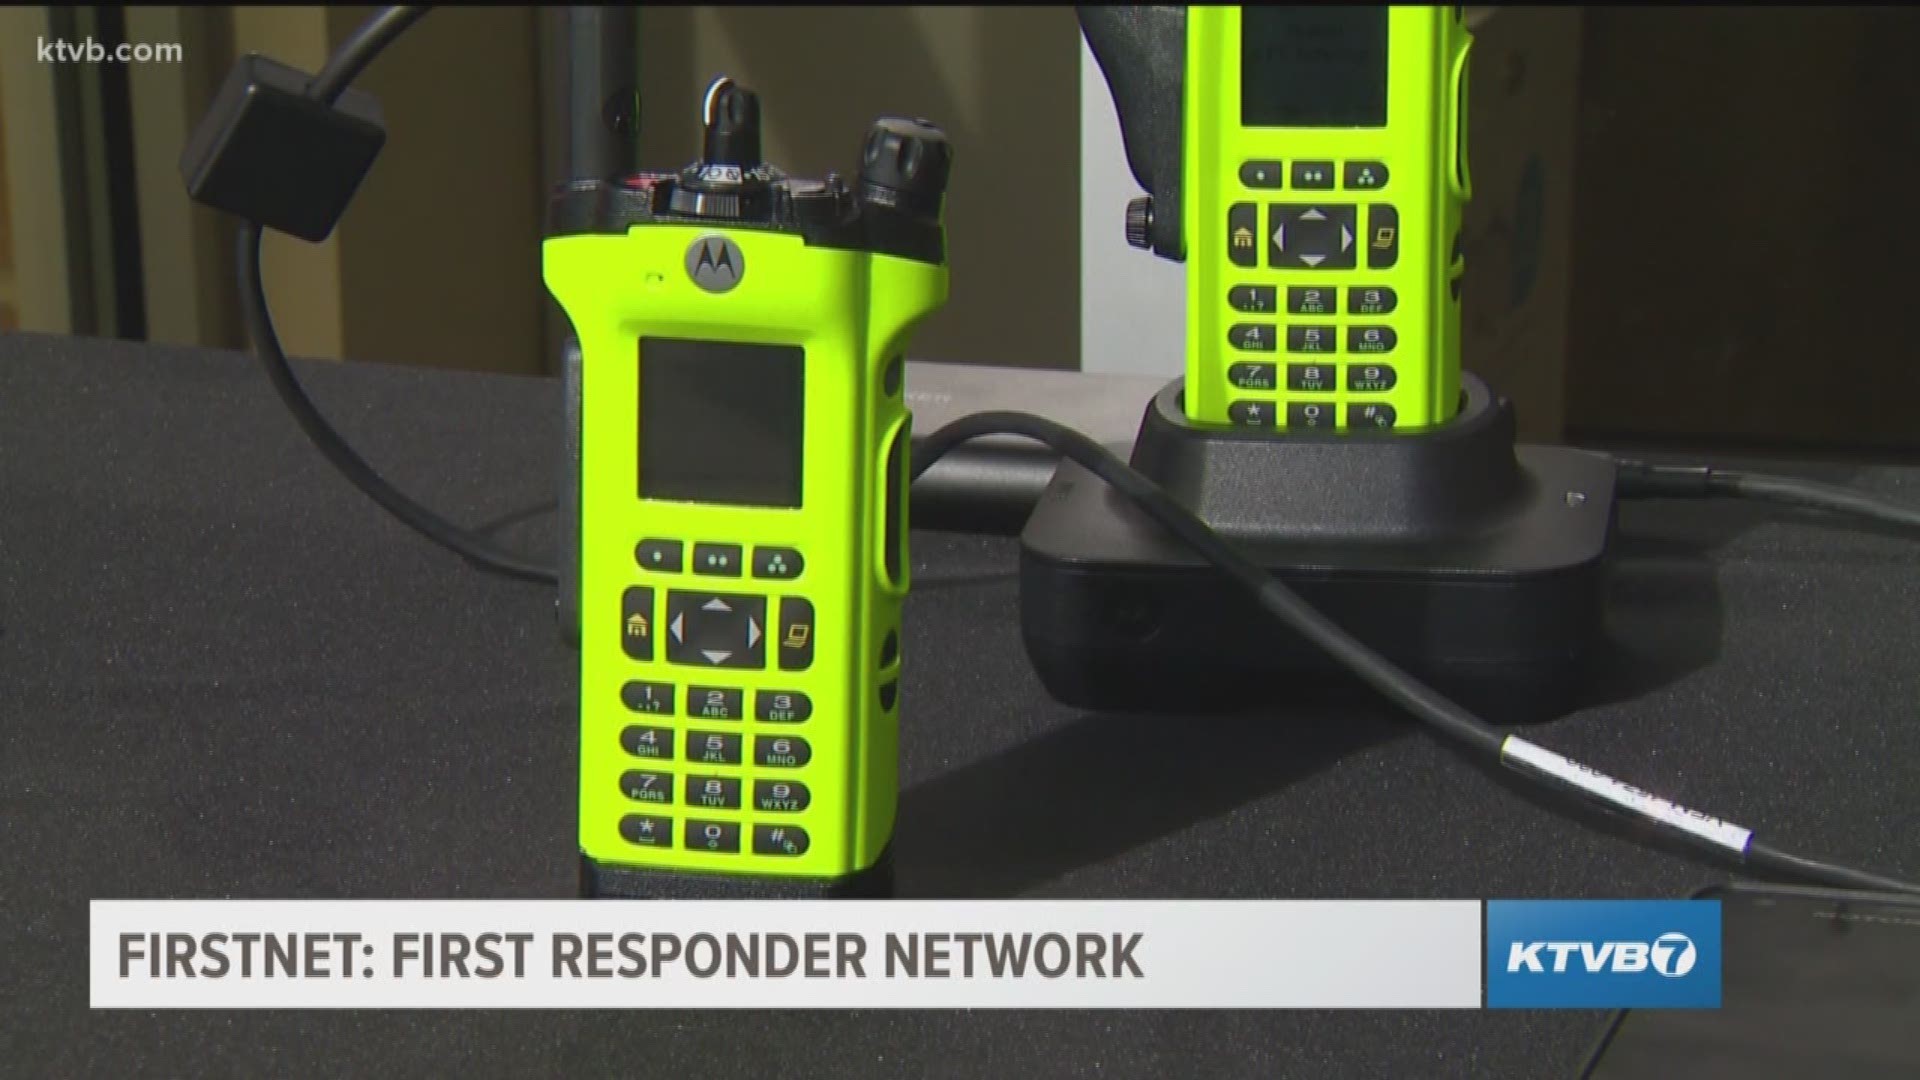 Born out of failures in communication during September 11, 2001, a nation-wide wireless network was specifically developed for first responders. It is now making its way to Idaho.